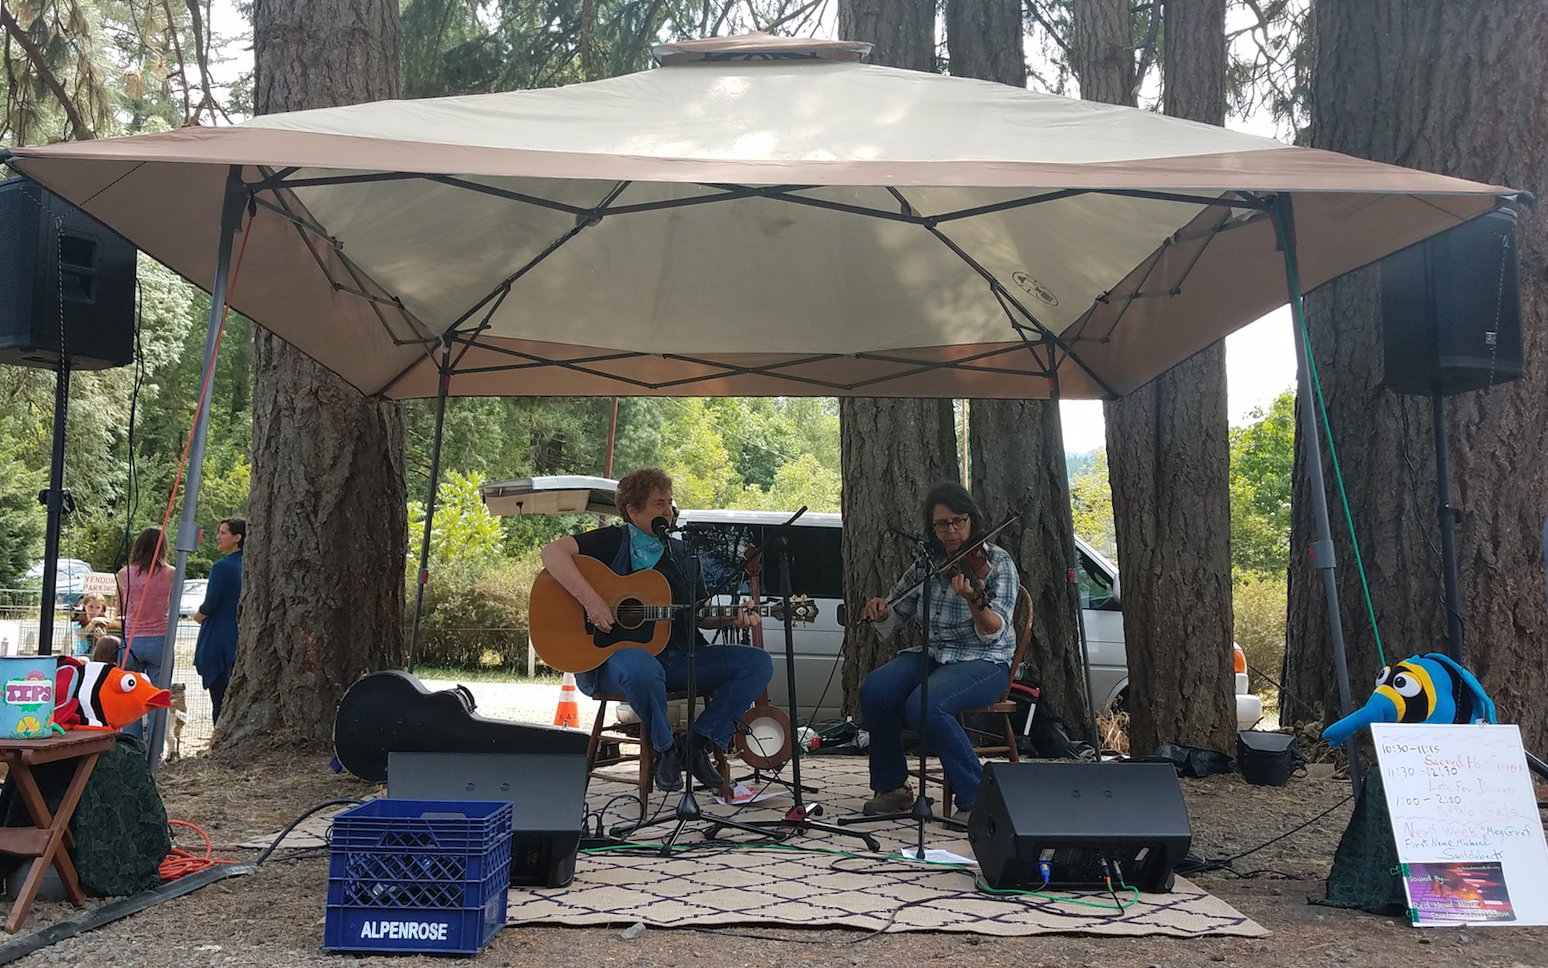 Buffalo Gals performing at the Spencer Creek Growers Market in August 2017